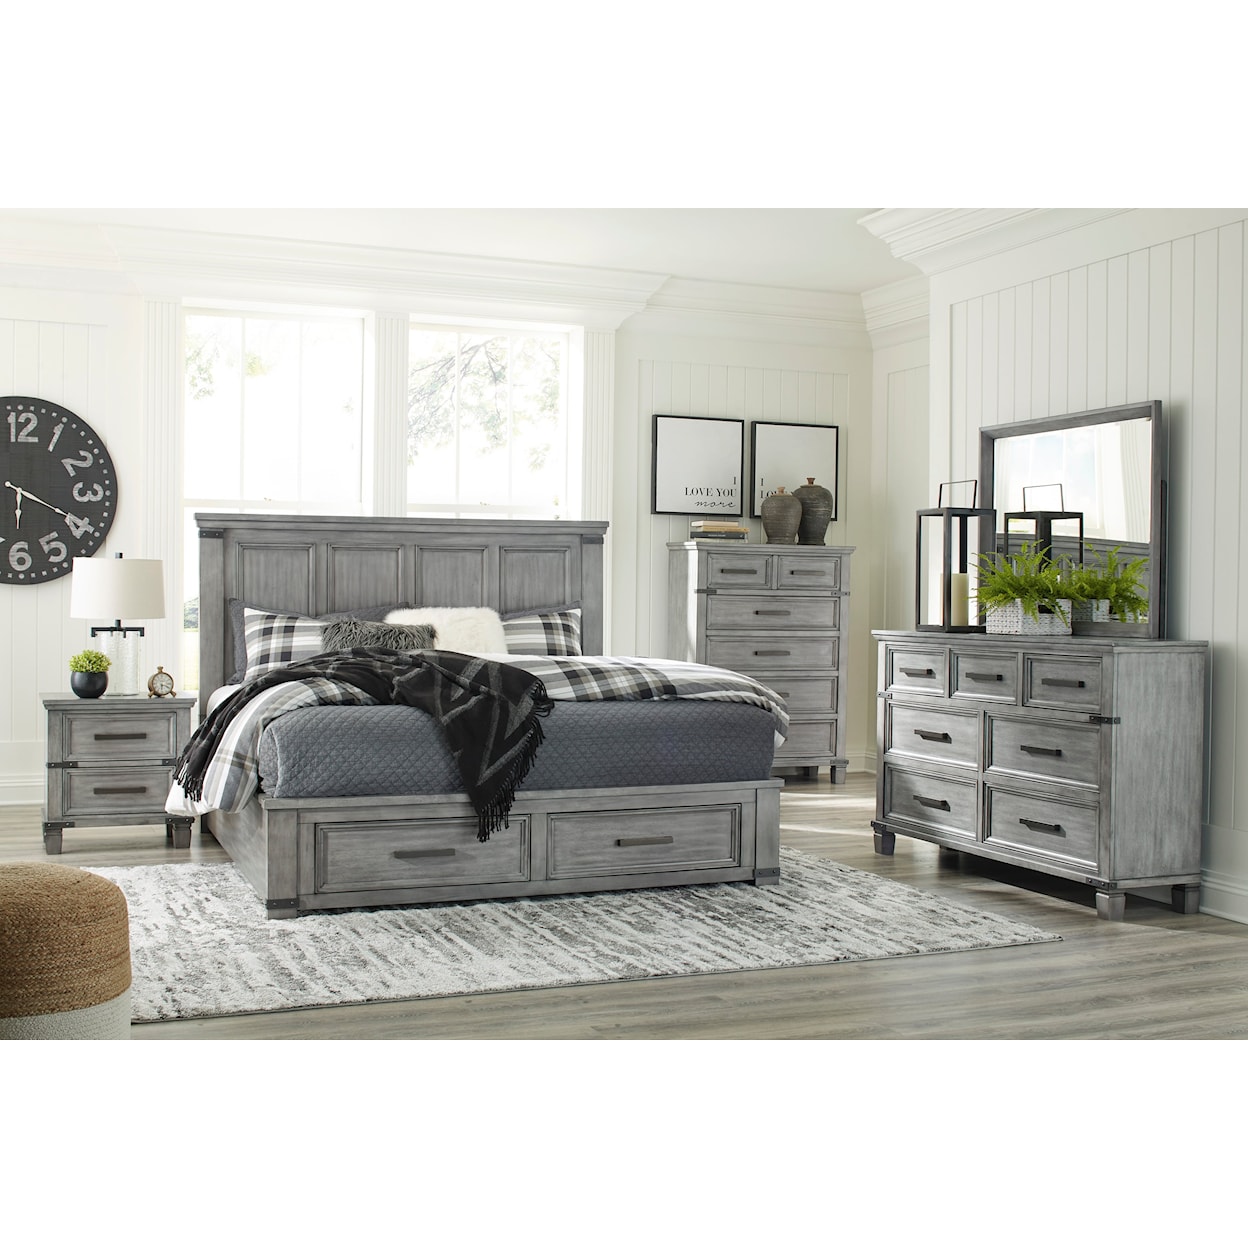 Signature Design by Ashley Russelyn King Storage Bed